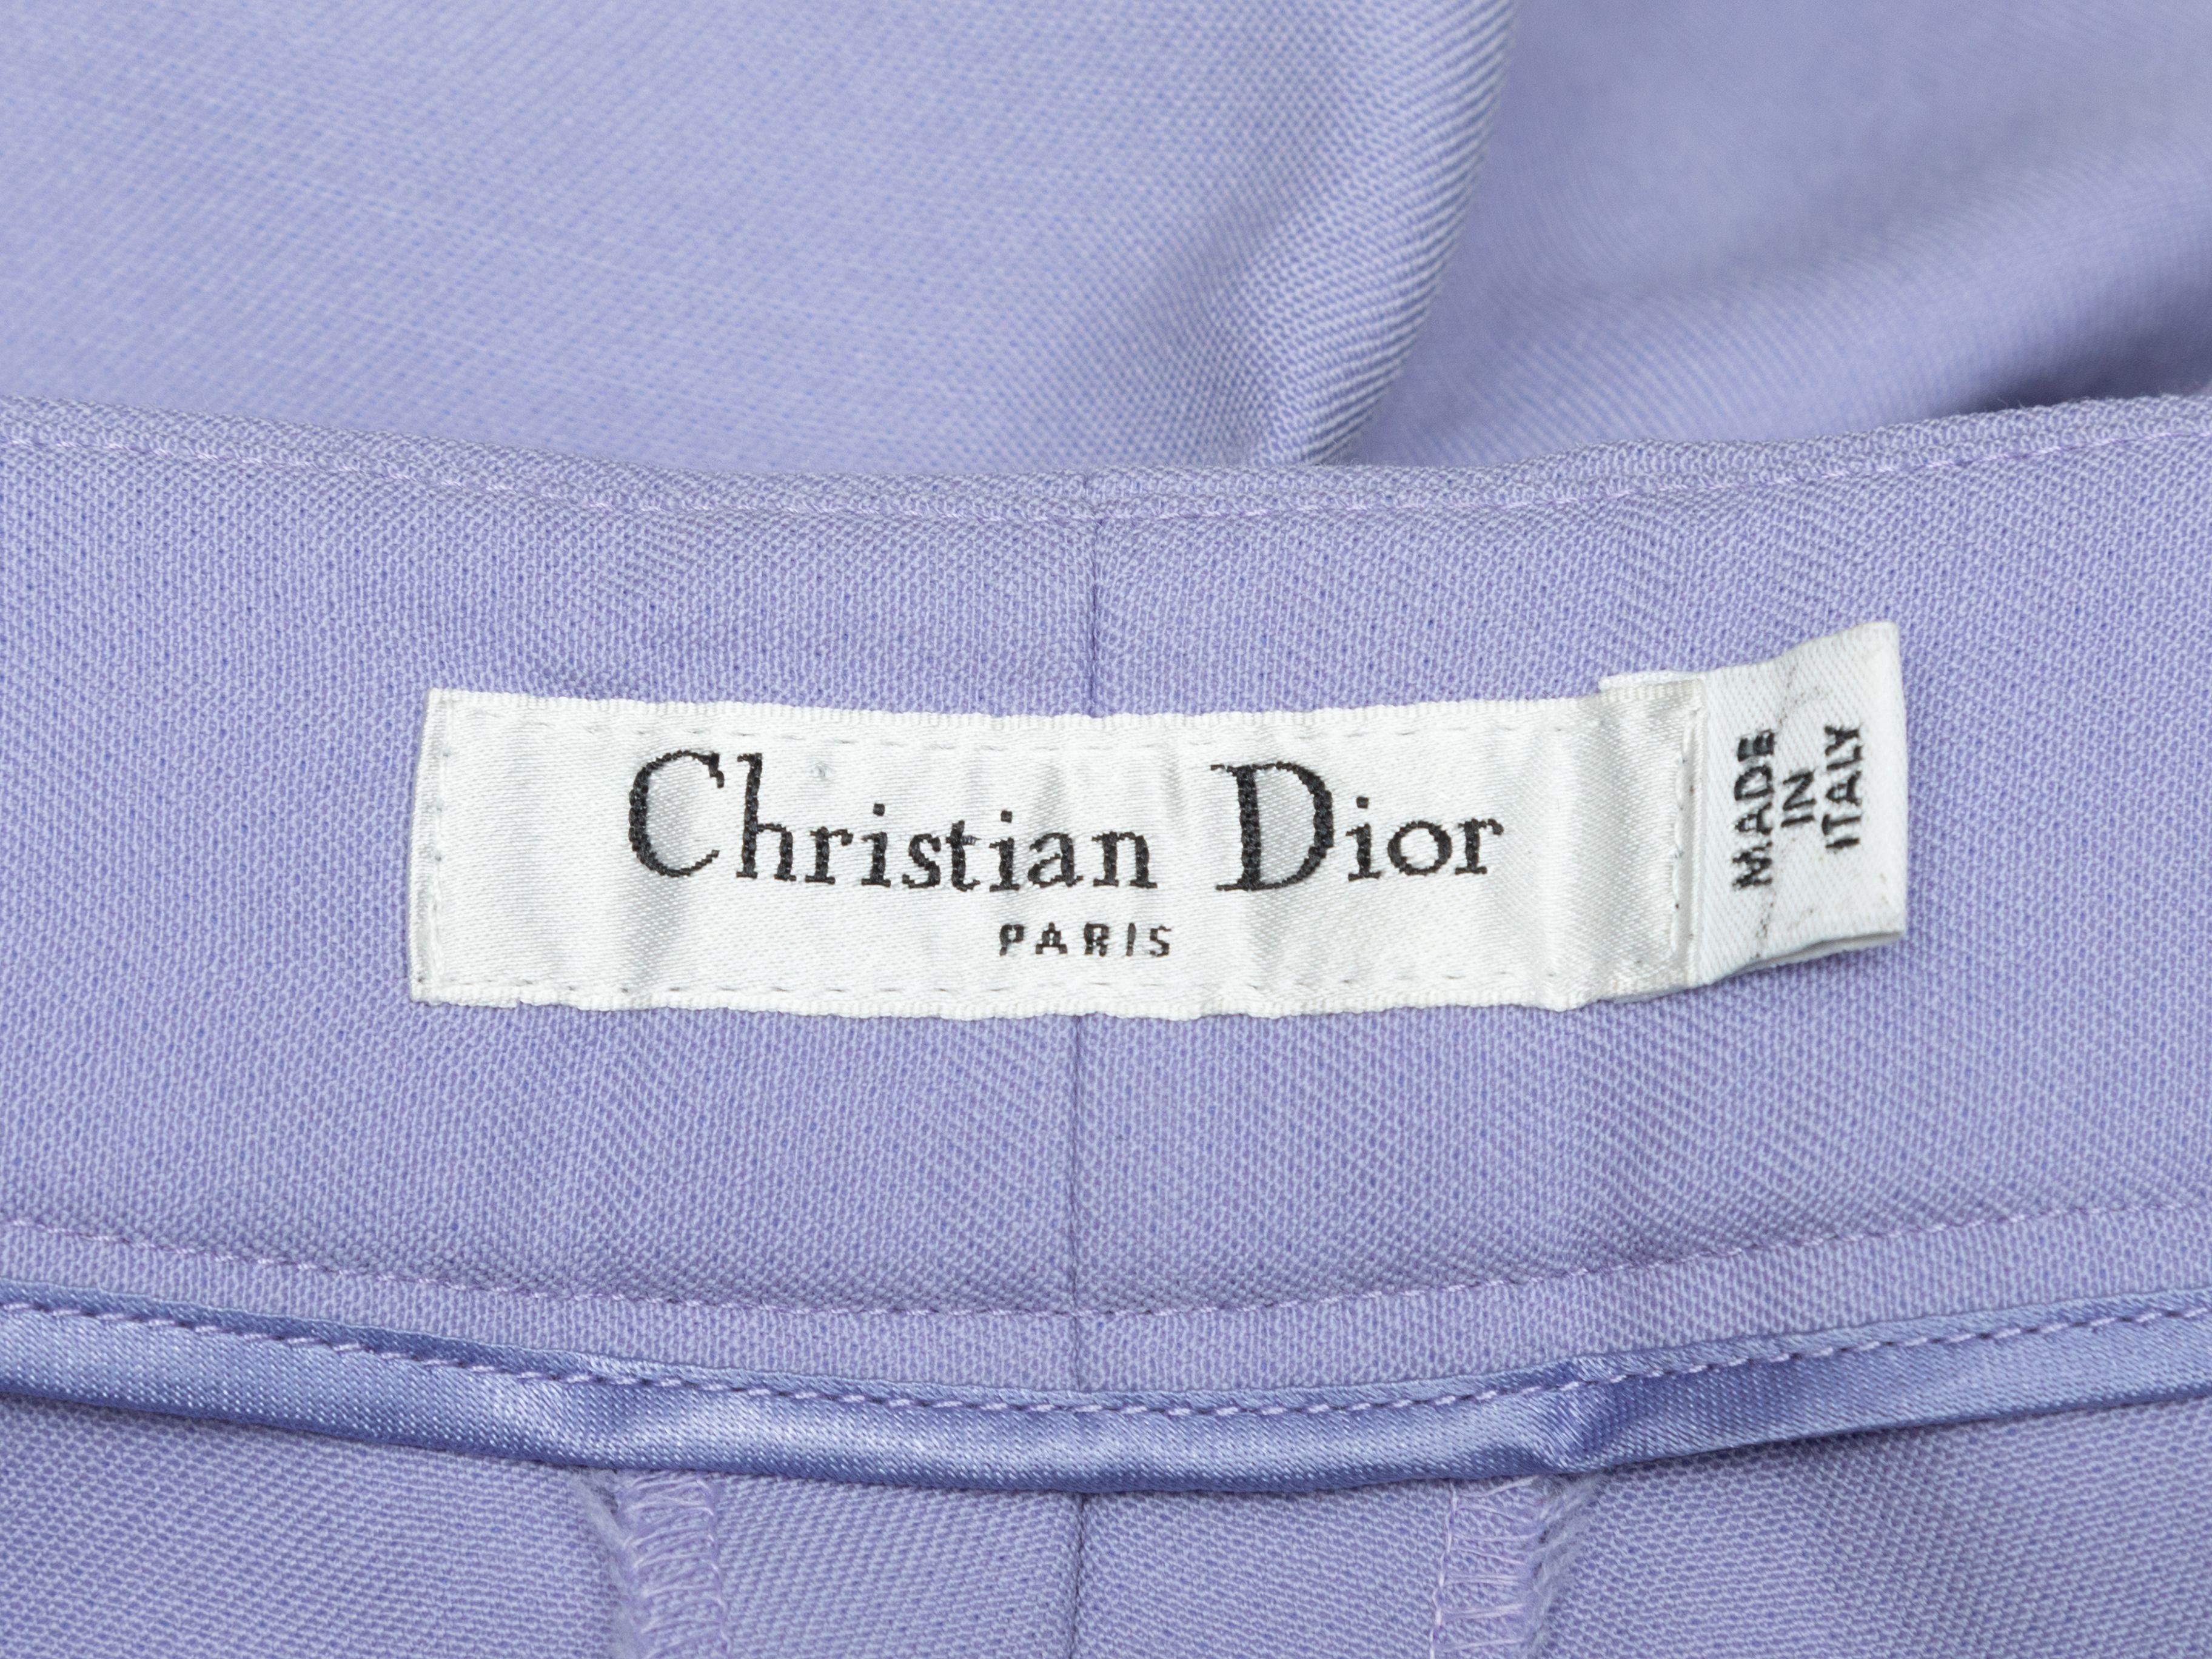 Product Details: Lavender virgin wool wide-leg pants by Christian Dior. Zip closure at side. 30